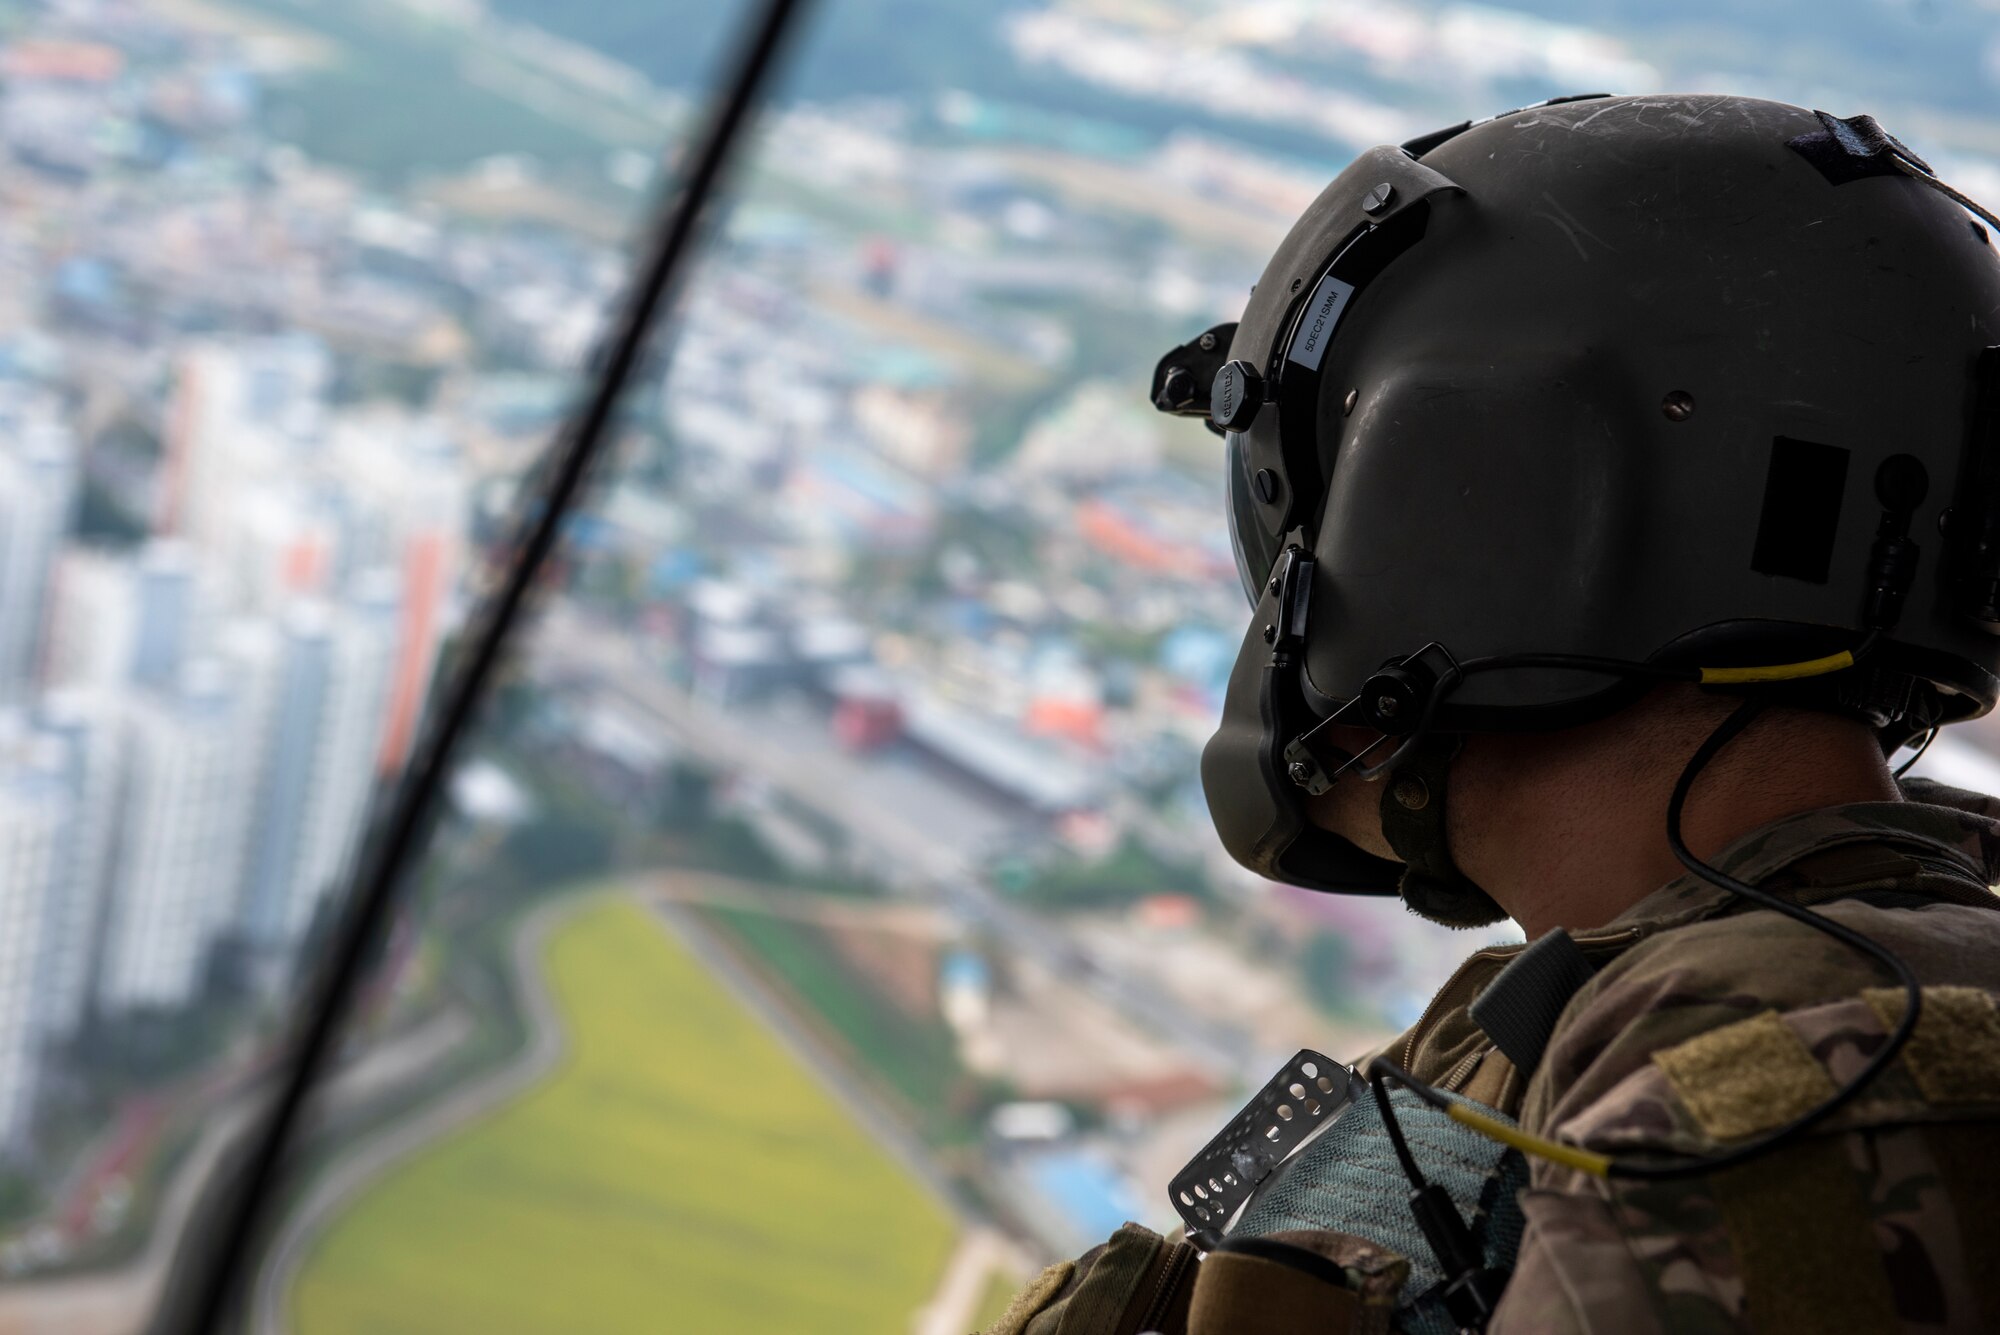 Senior Airman Eaven Allison, 33rd Rescue Squadron special missions aviator, looks out over the landscape from inside of an HH-60G Pave Hawk helicopter during a combat search and rescue training event